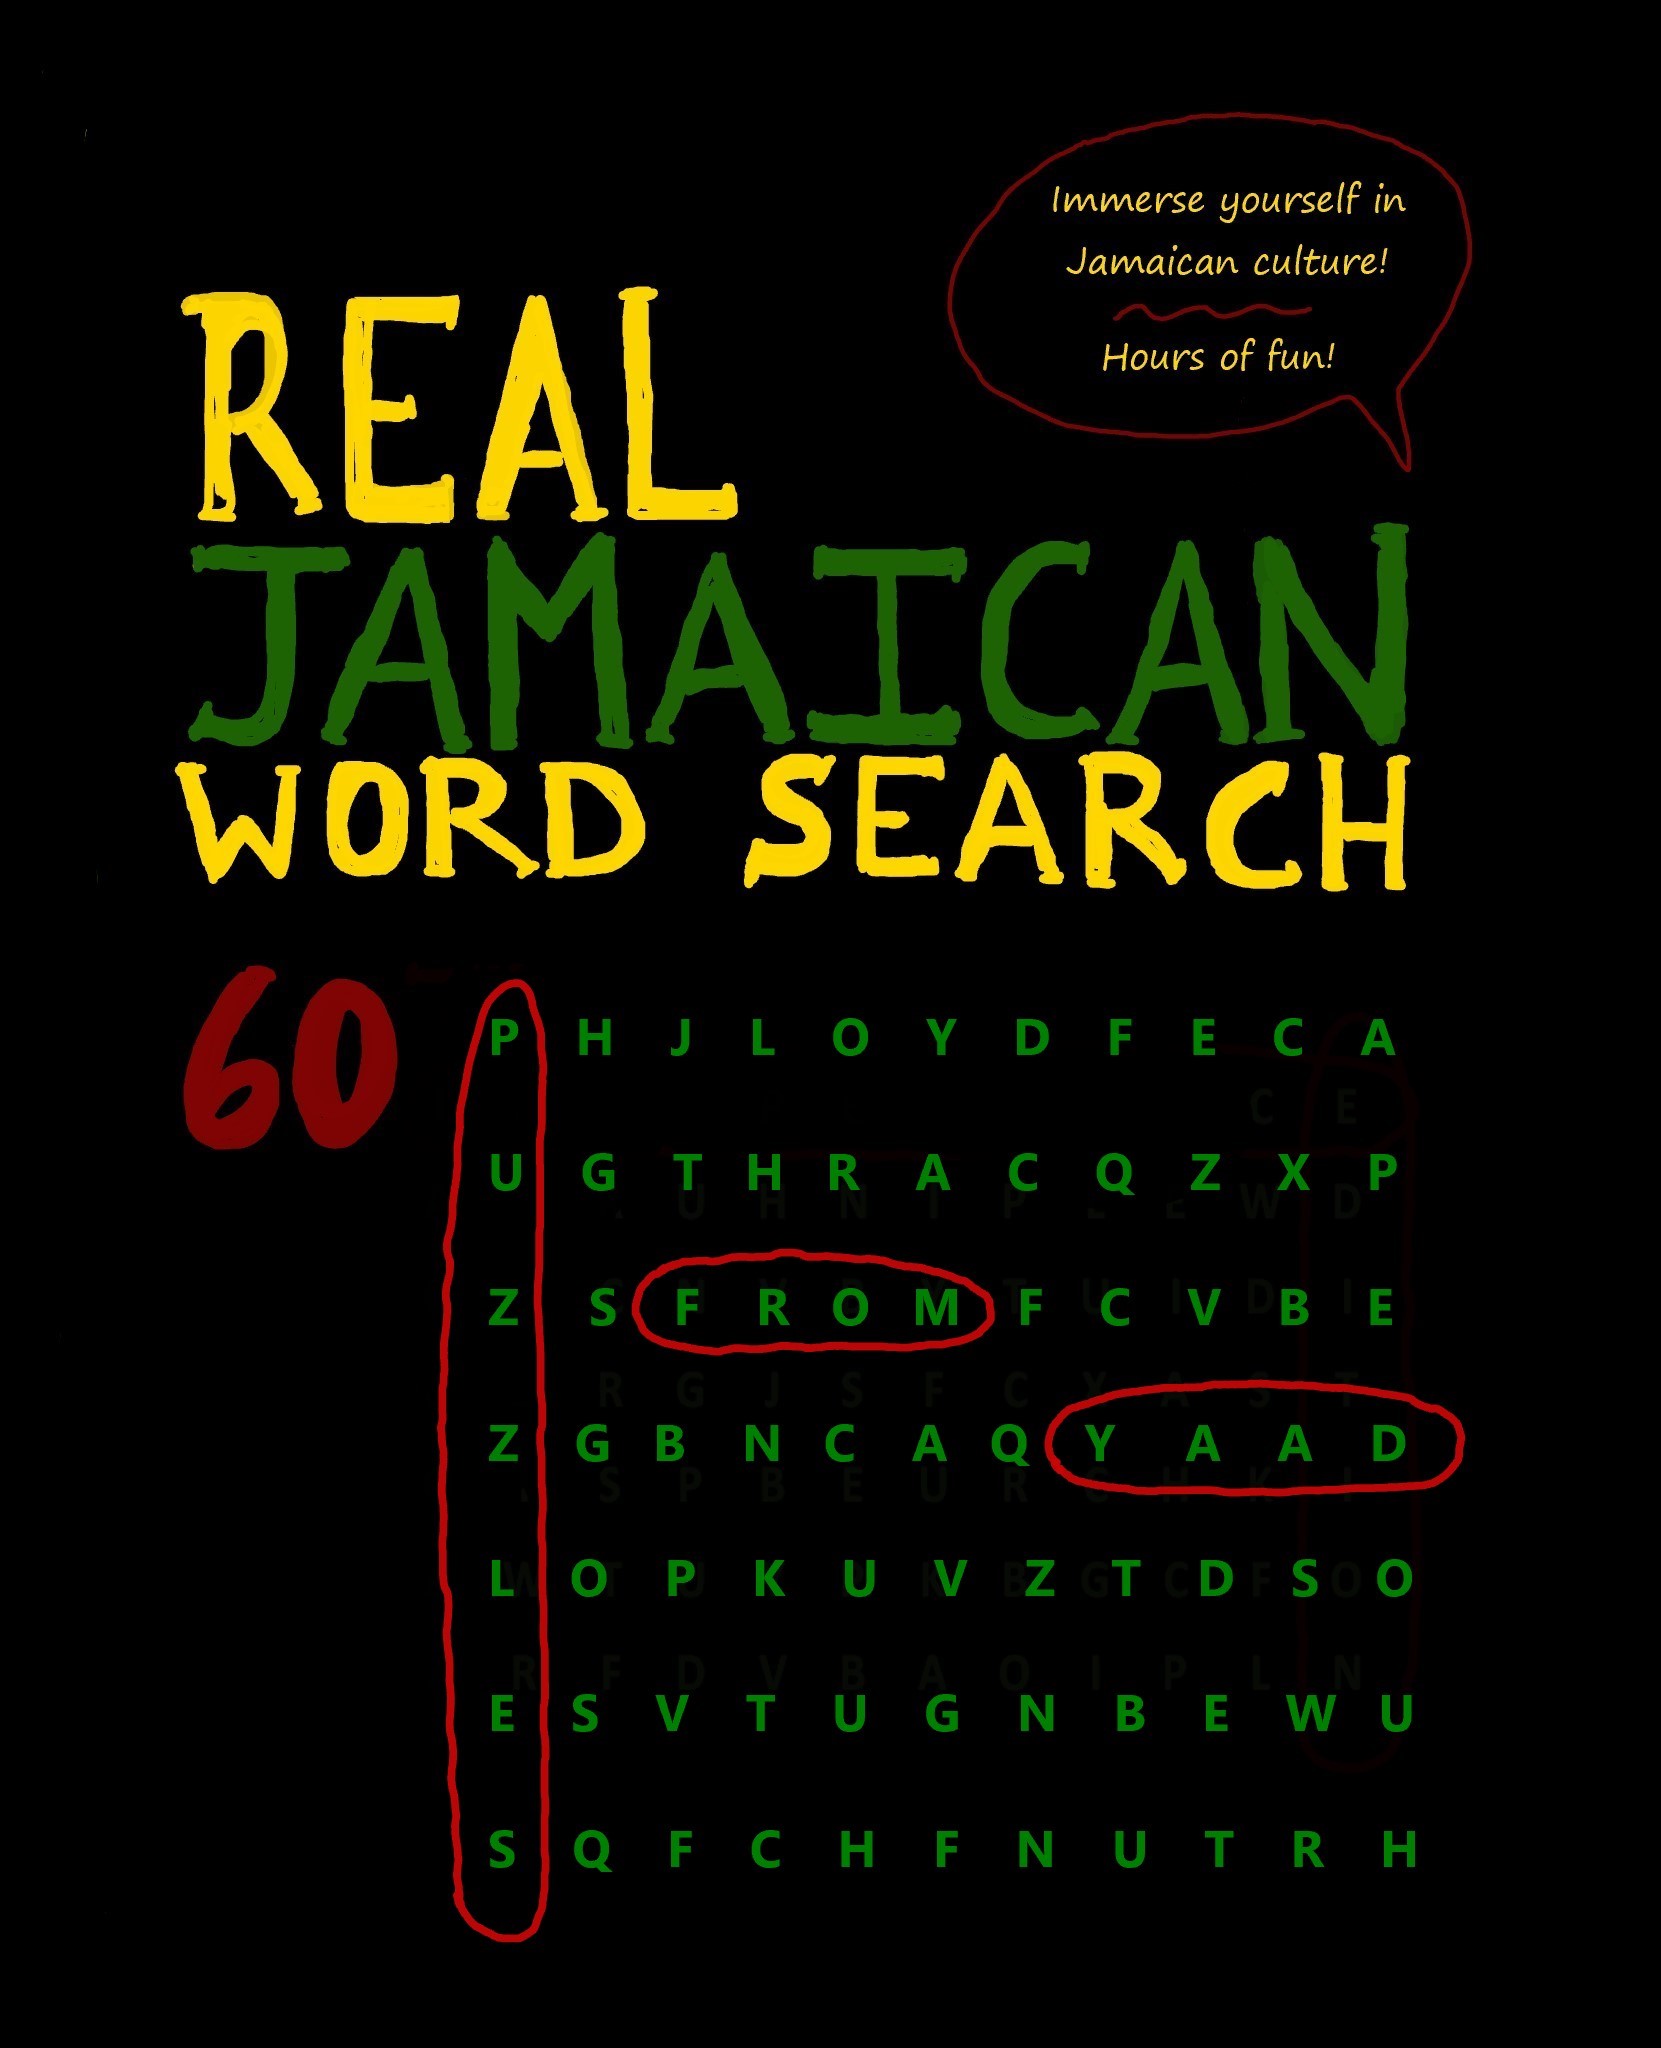 Real Jamaican Word Search